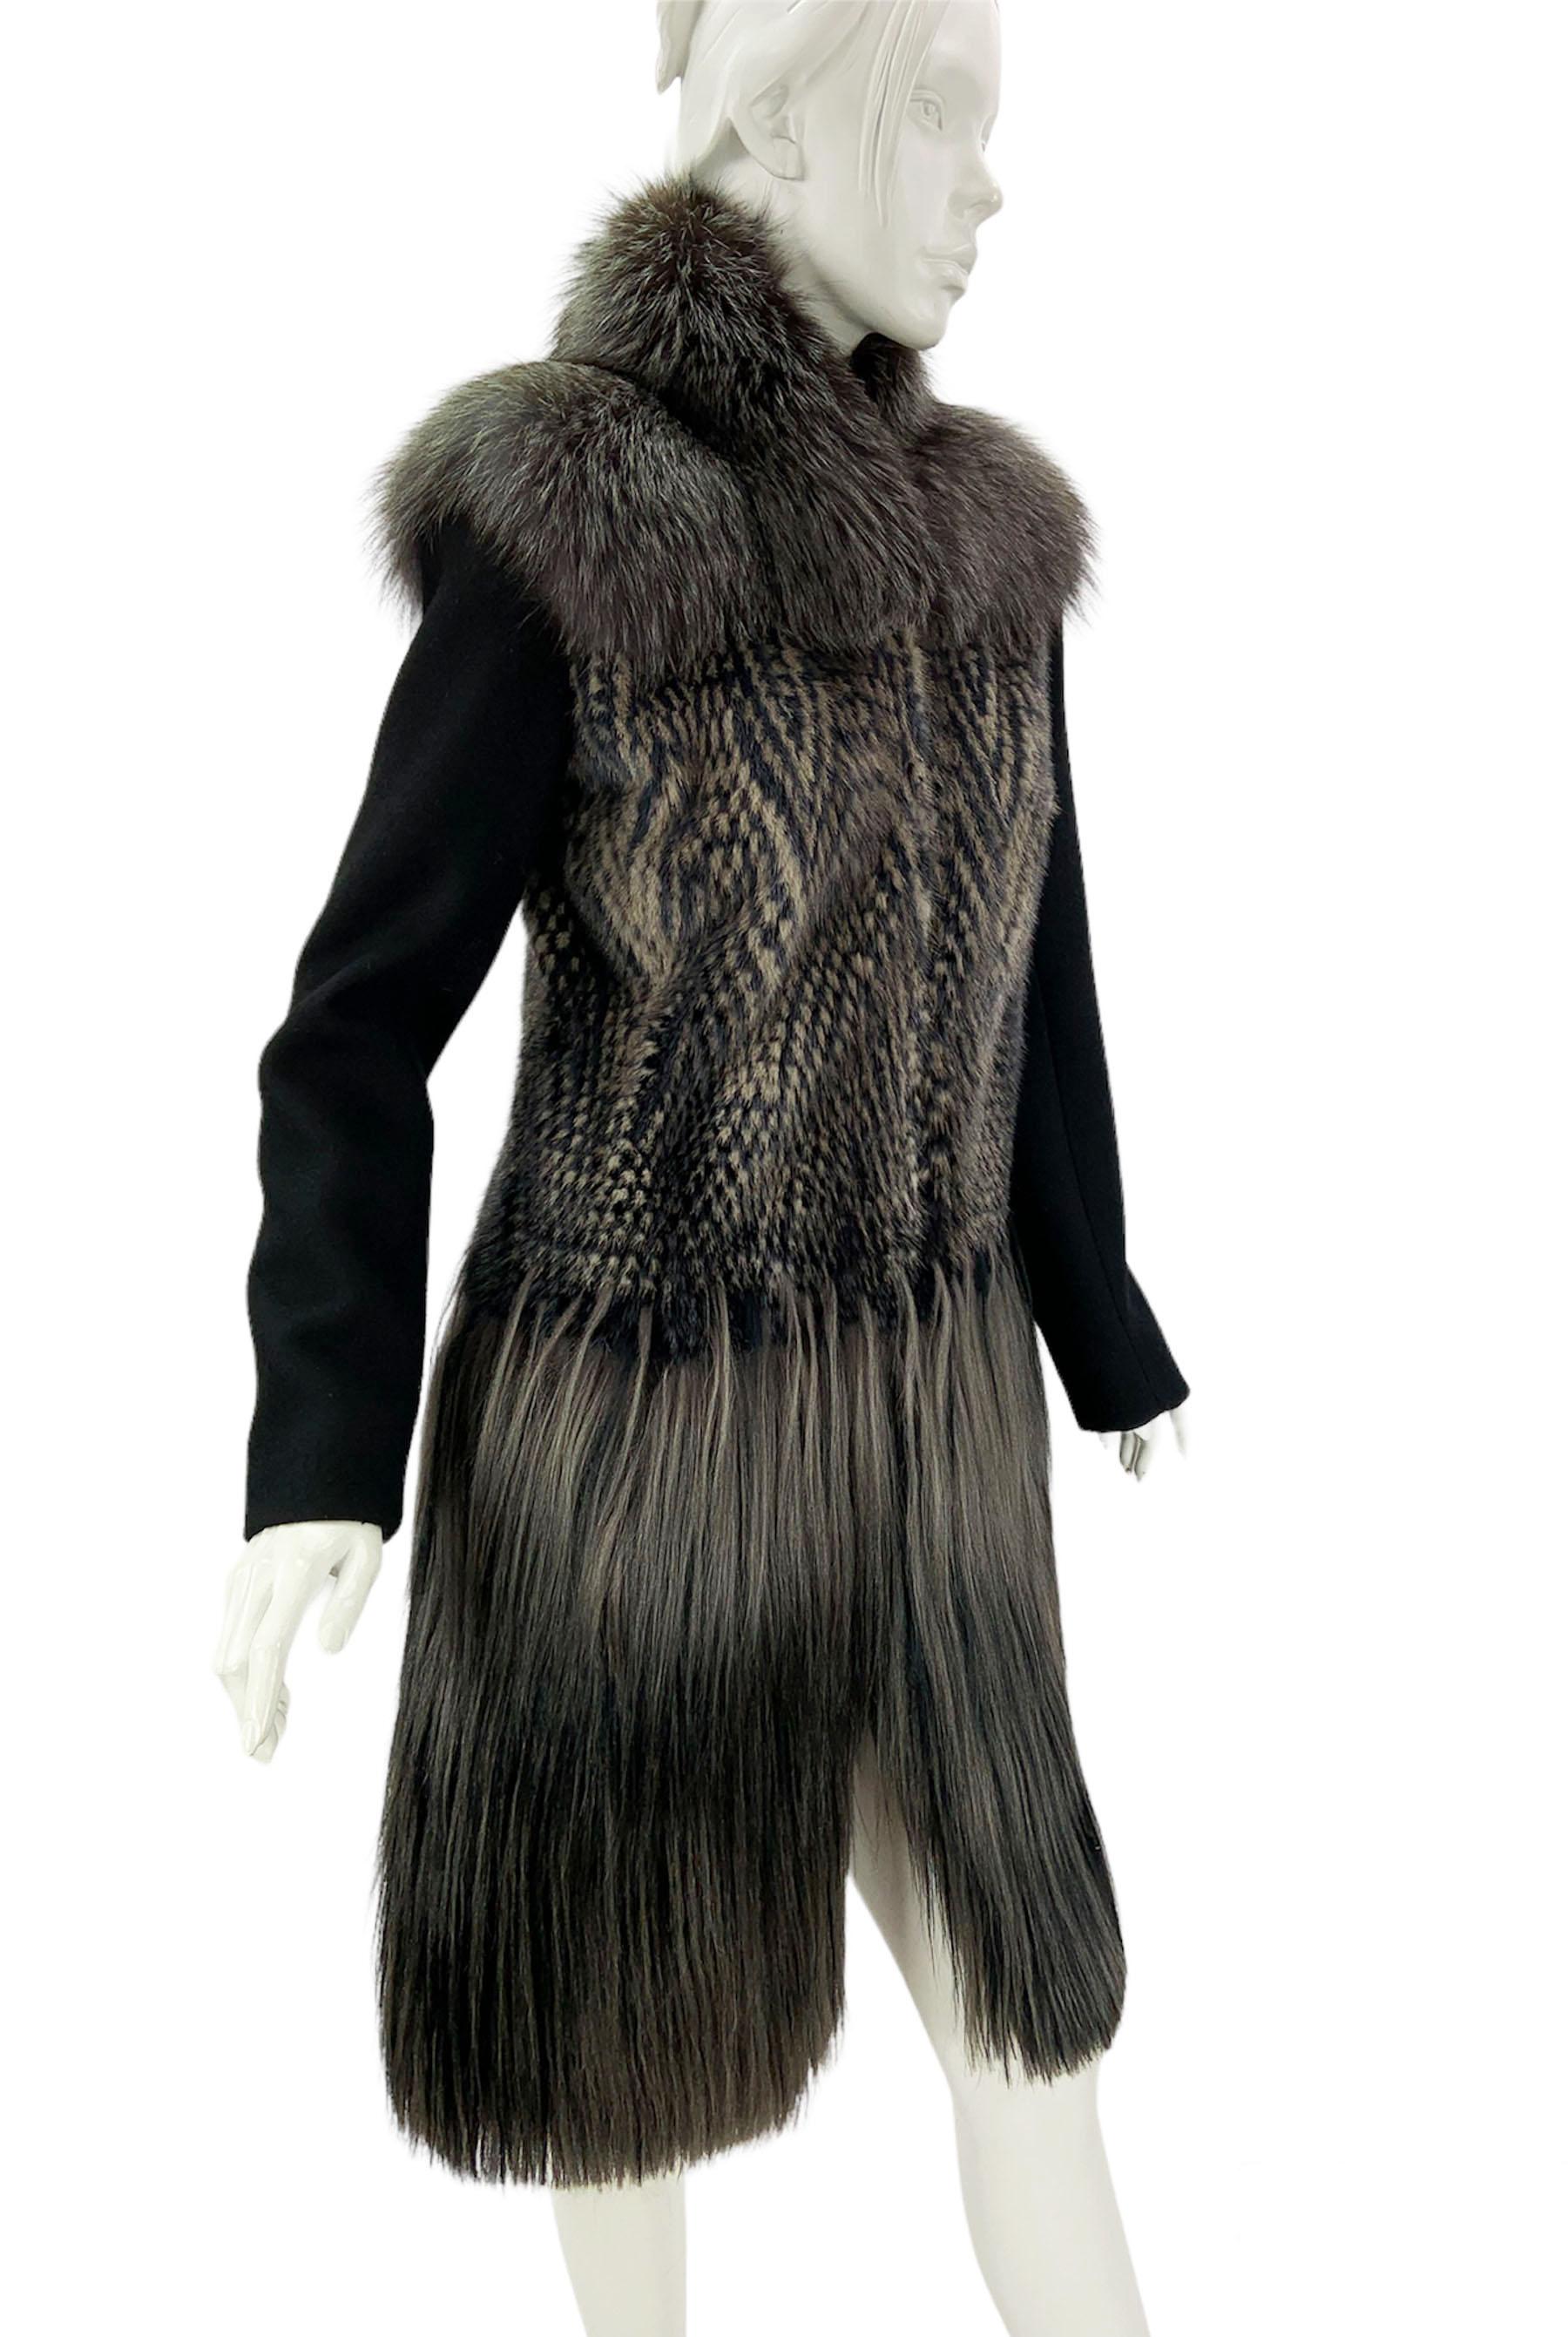 Gucci Fur Combination Long Coat 
Italian size - 38
Amazing combination of real fur - Fox, Mink and Goat ( place of origin Finland).
Sleeves - 90% wool, 10% cashmere, Lining - 100% silk.
Straight silhouette, Side pockets, Hook and eye